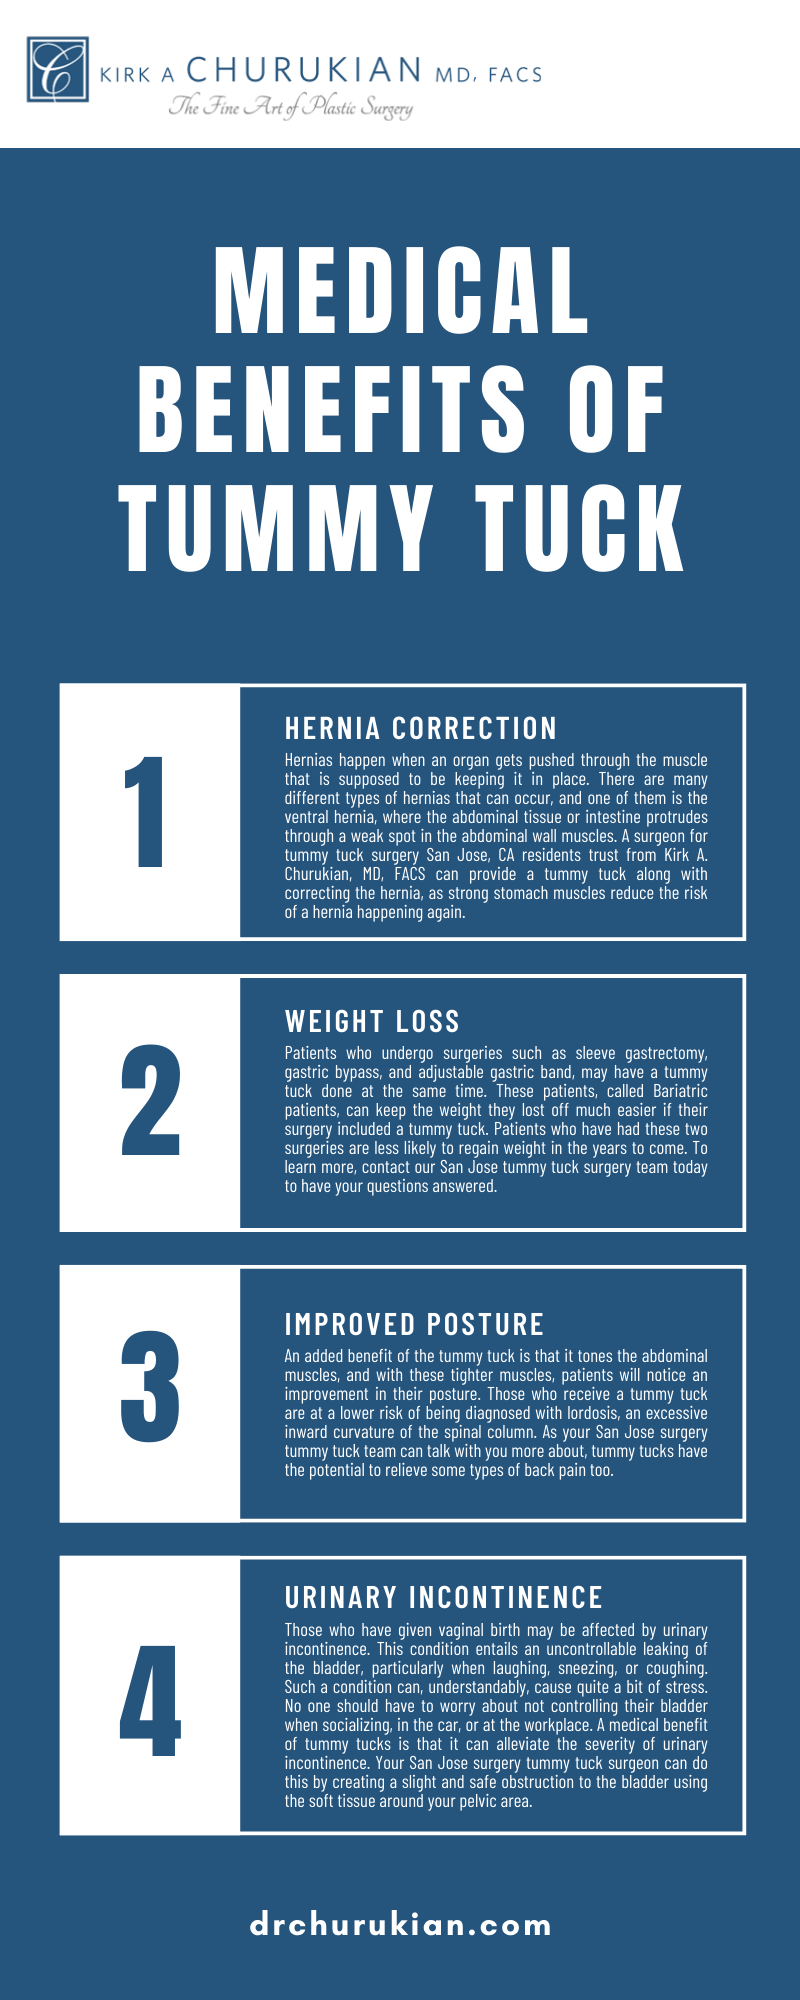 MEDICAL BENEFITS OF TUMMY TUCK INFOGRAPHIC